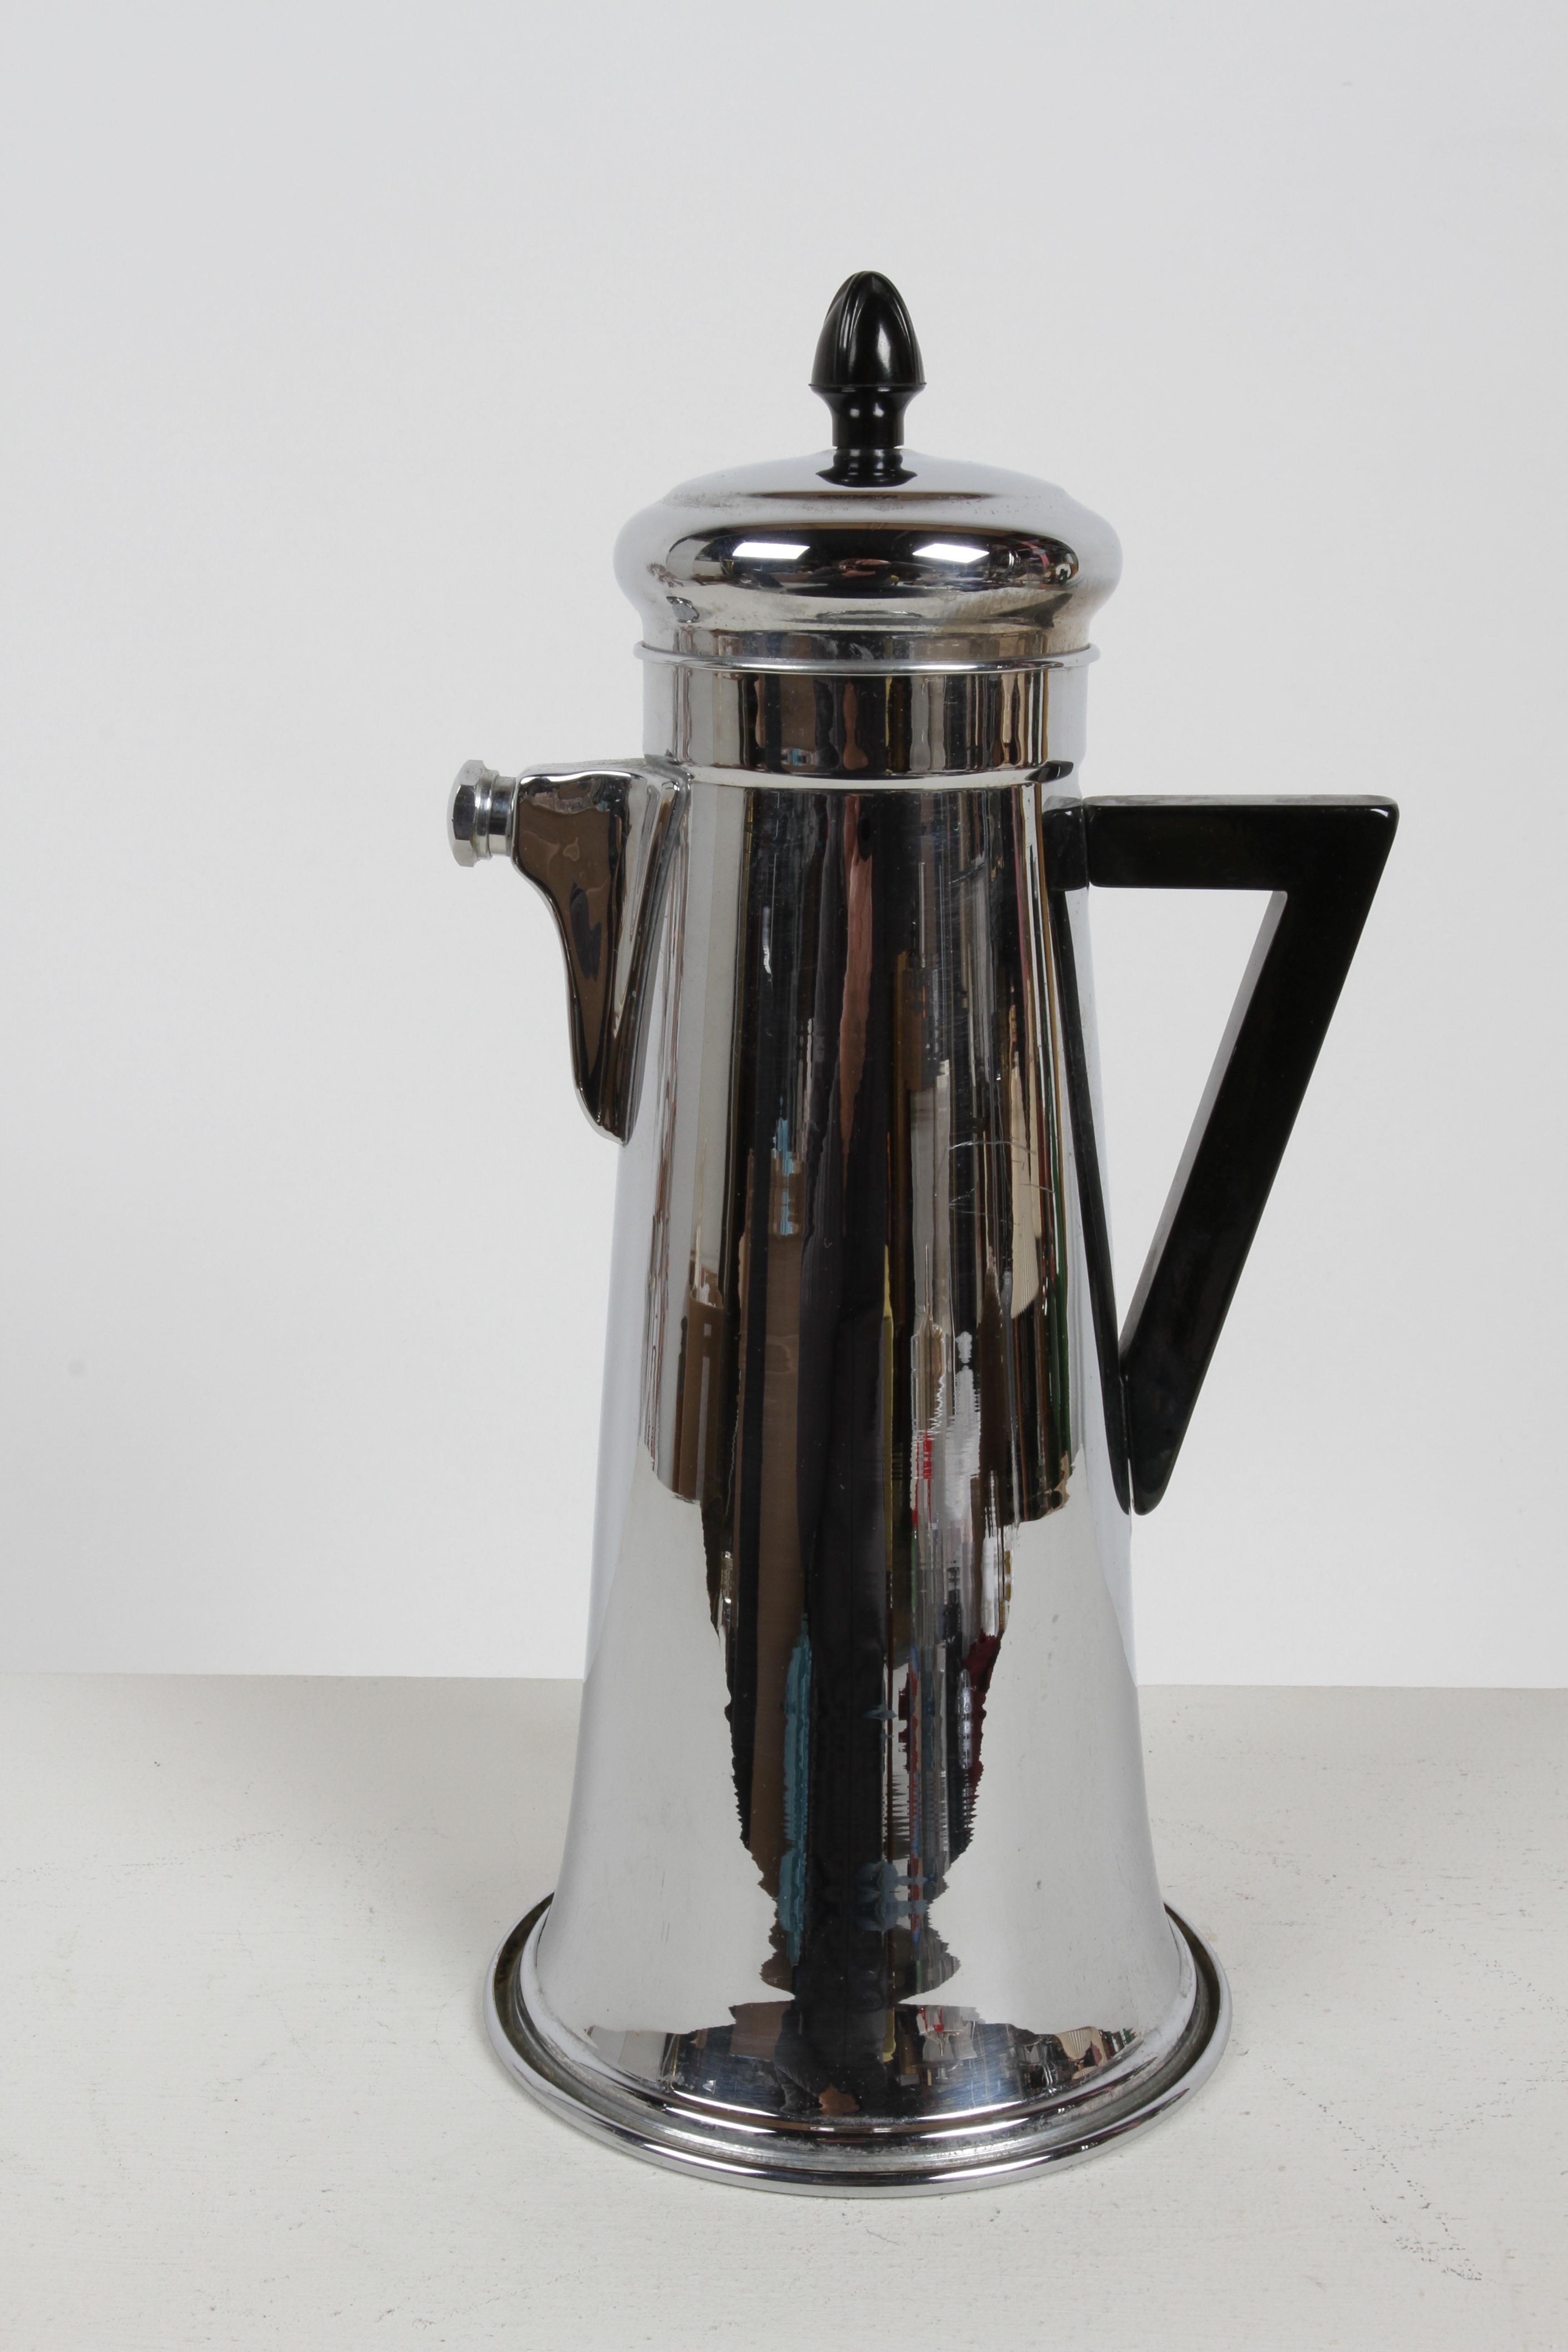 1930s Forman Brothers Art Deco Black Handle Chrome Cocktail Shaker with Recipes  For Sale 6